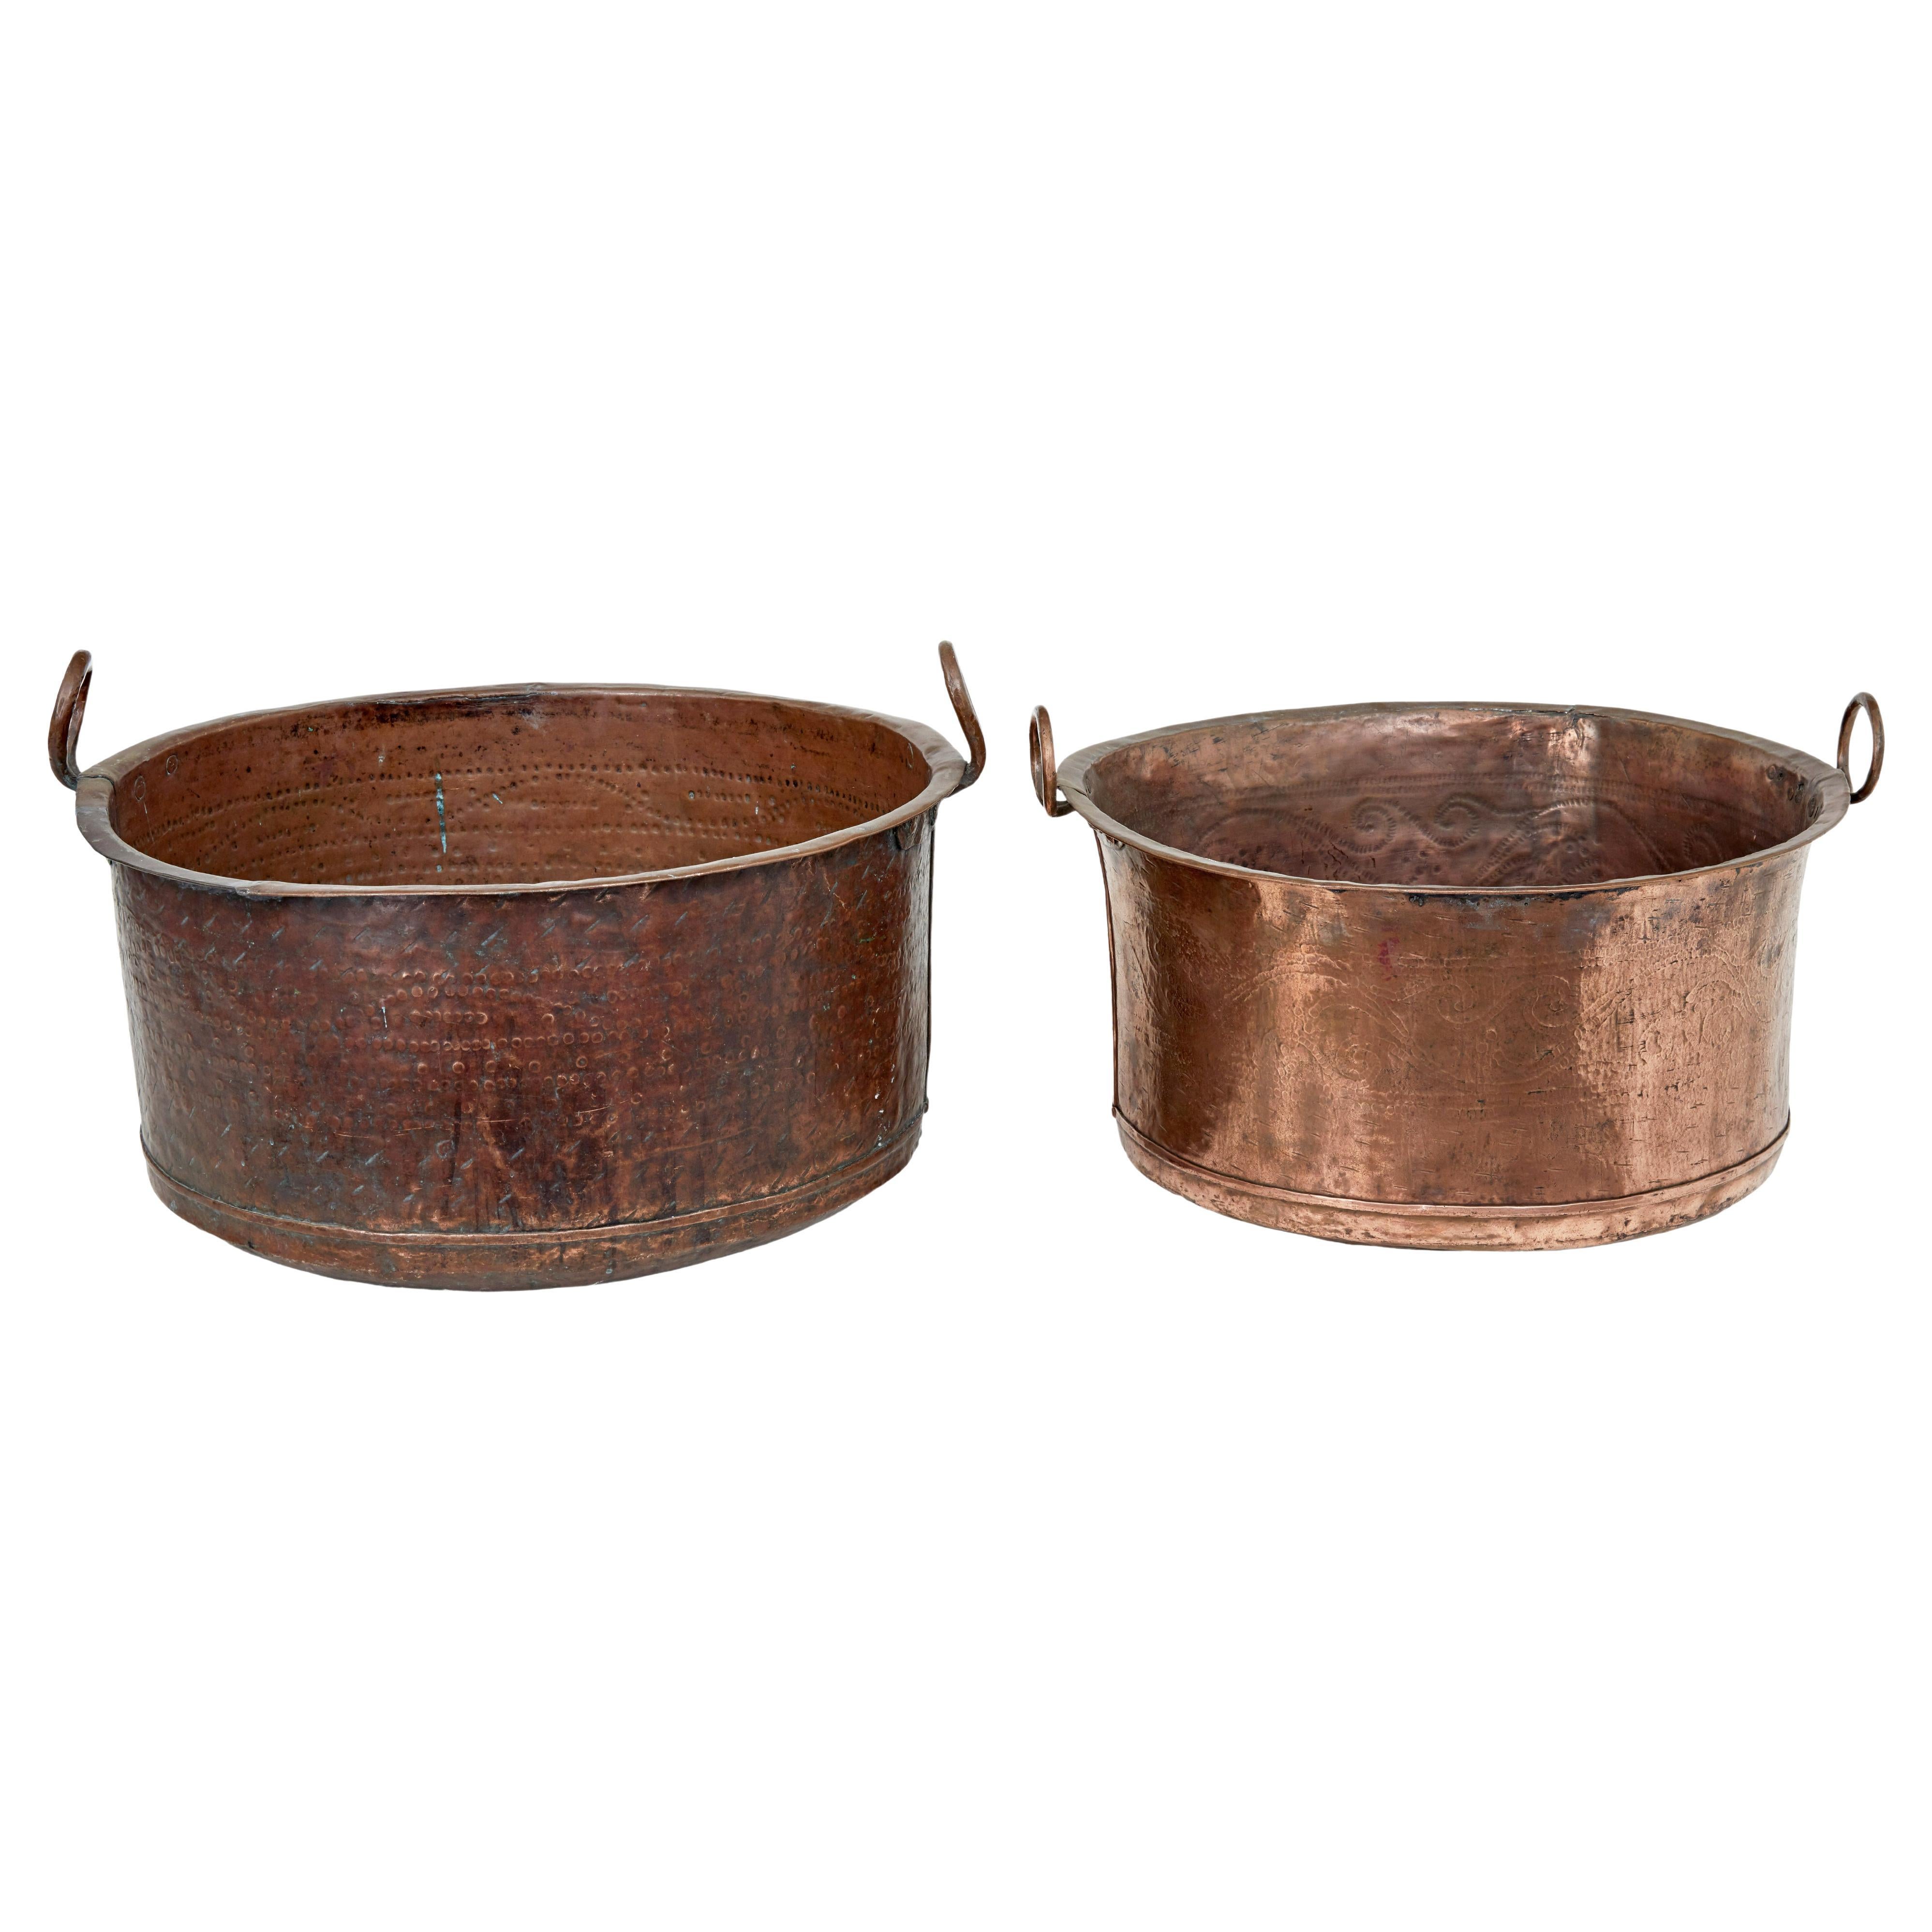 2 19th century Victorian large copper cooking vessels